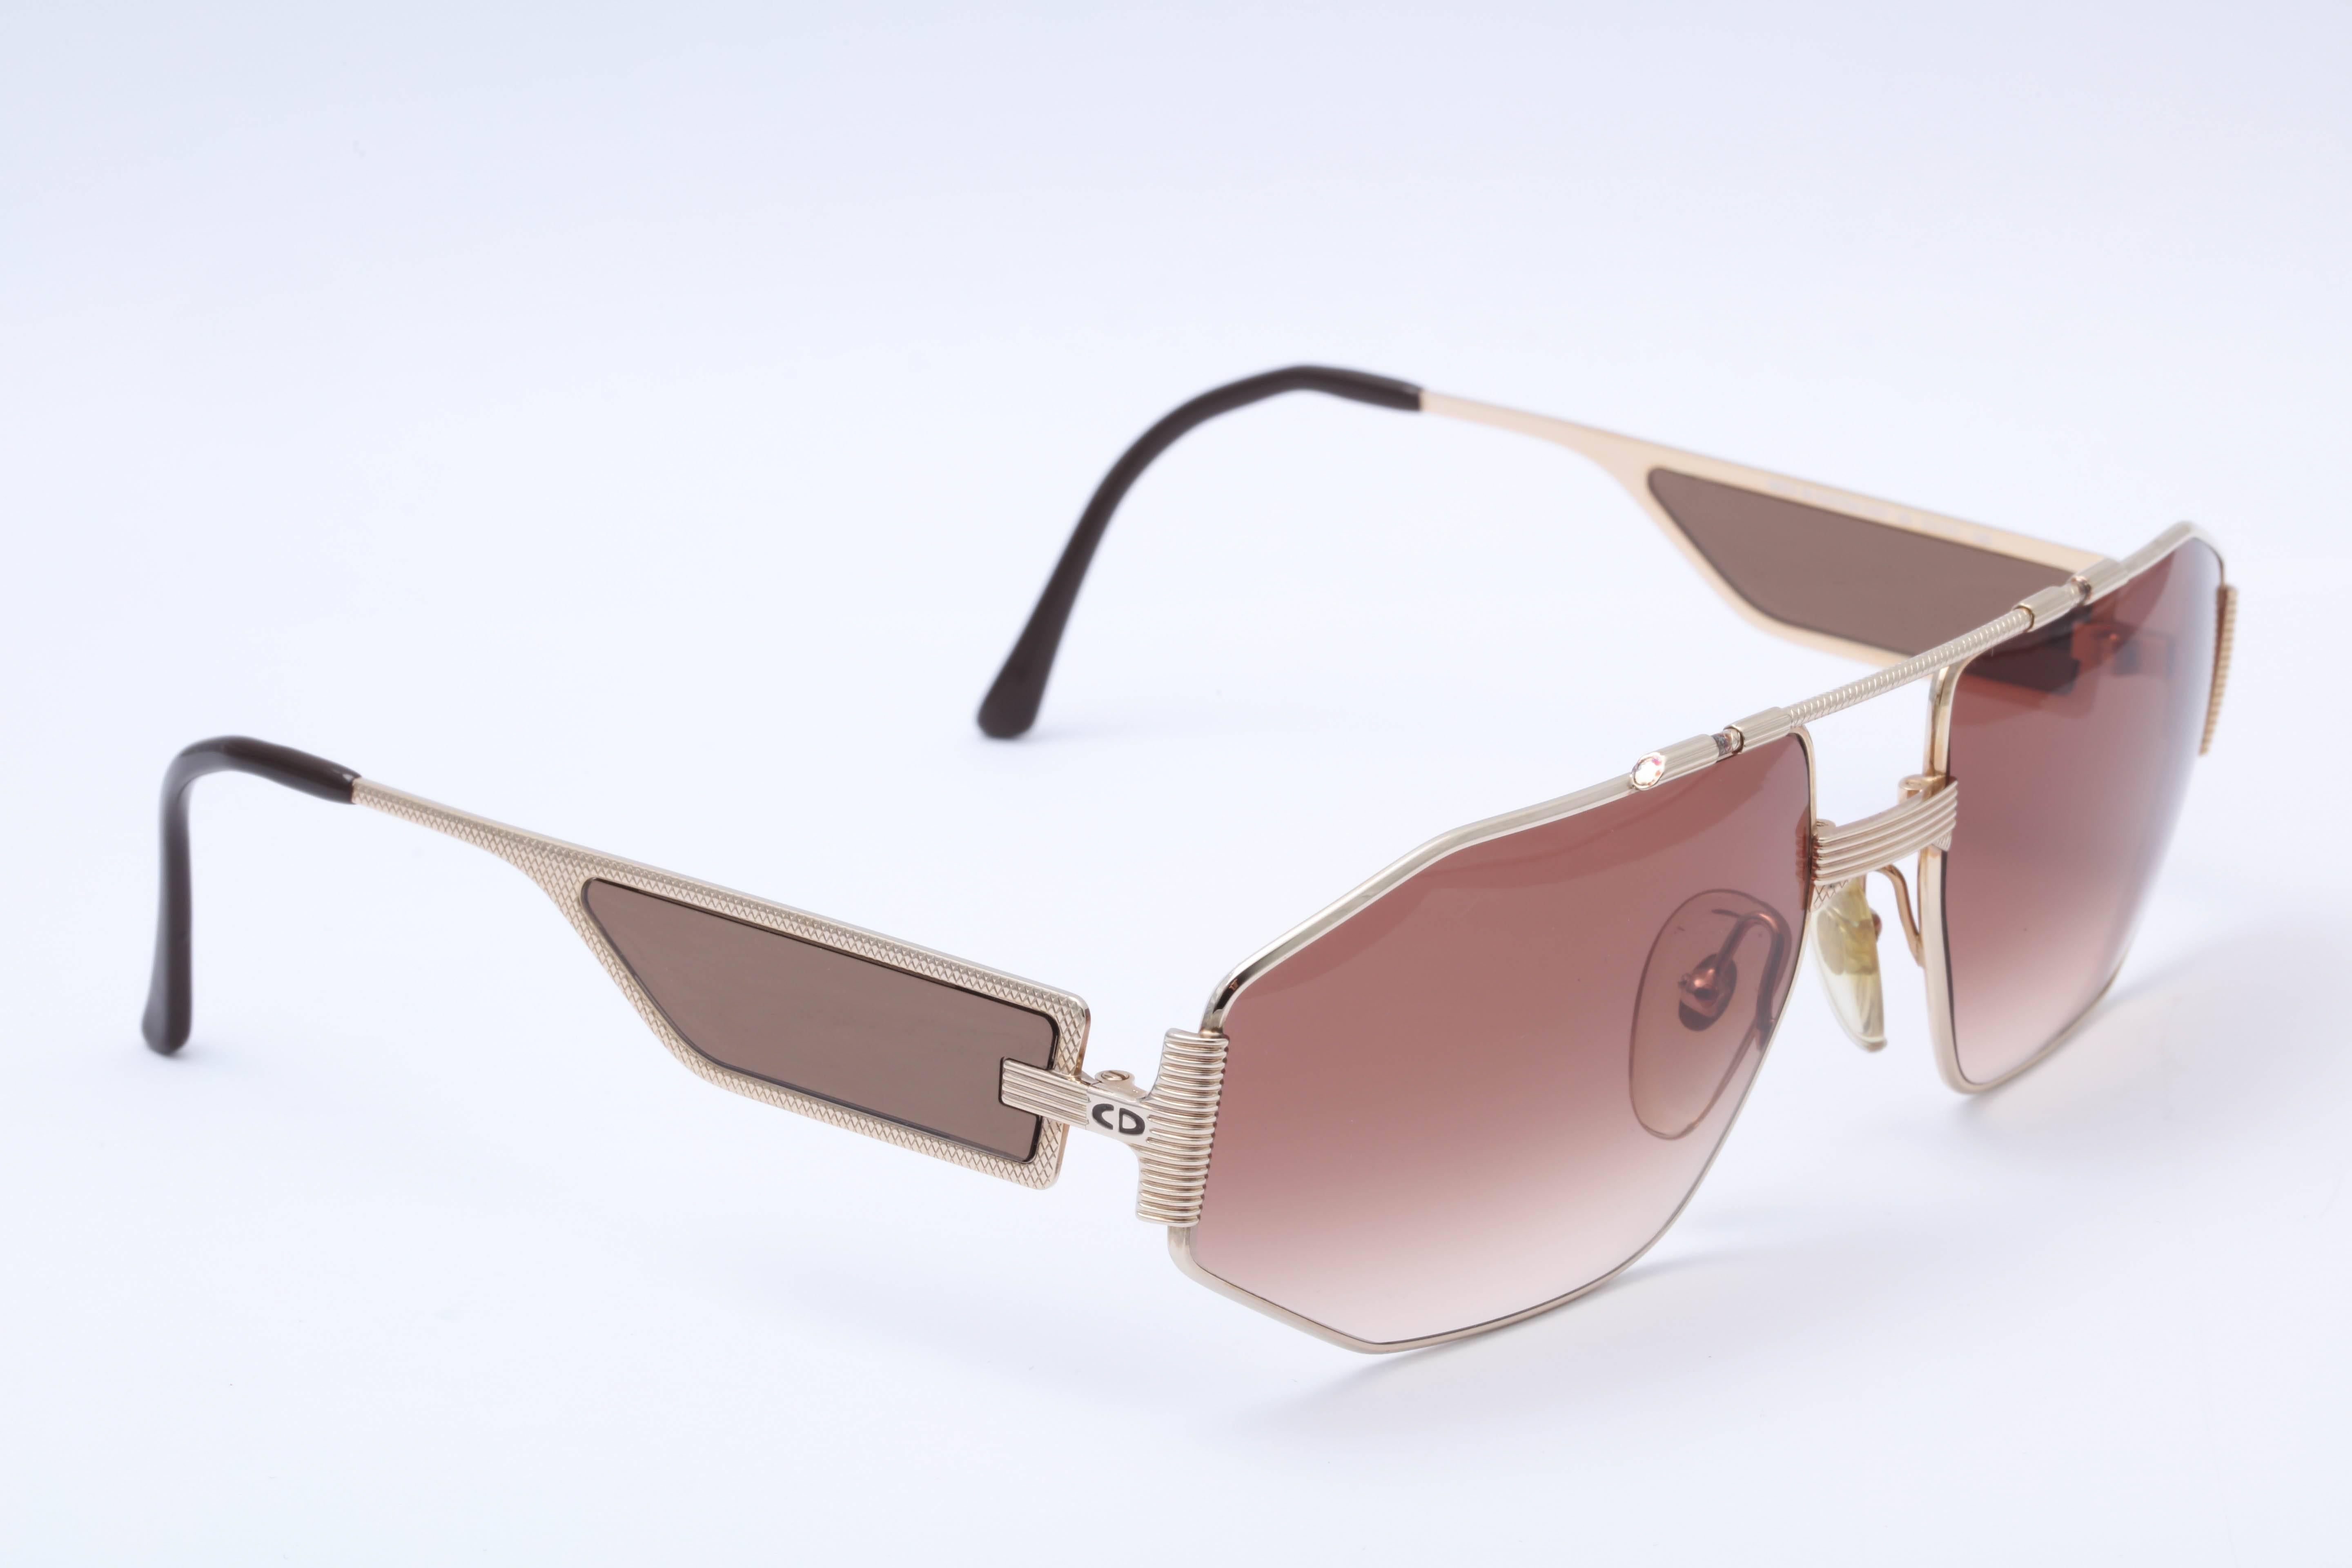 Vintage Christian Dior Aviator Sunglasses In Excellent Condition For Sale In Chicago, IL